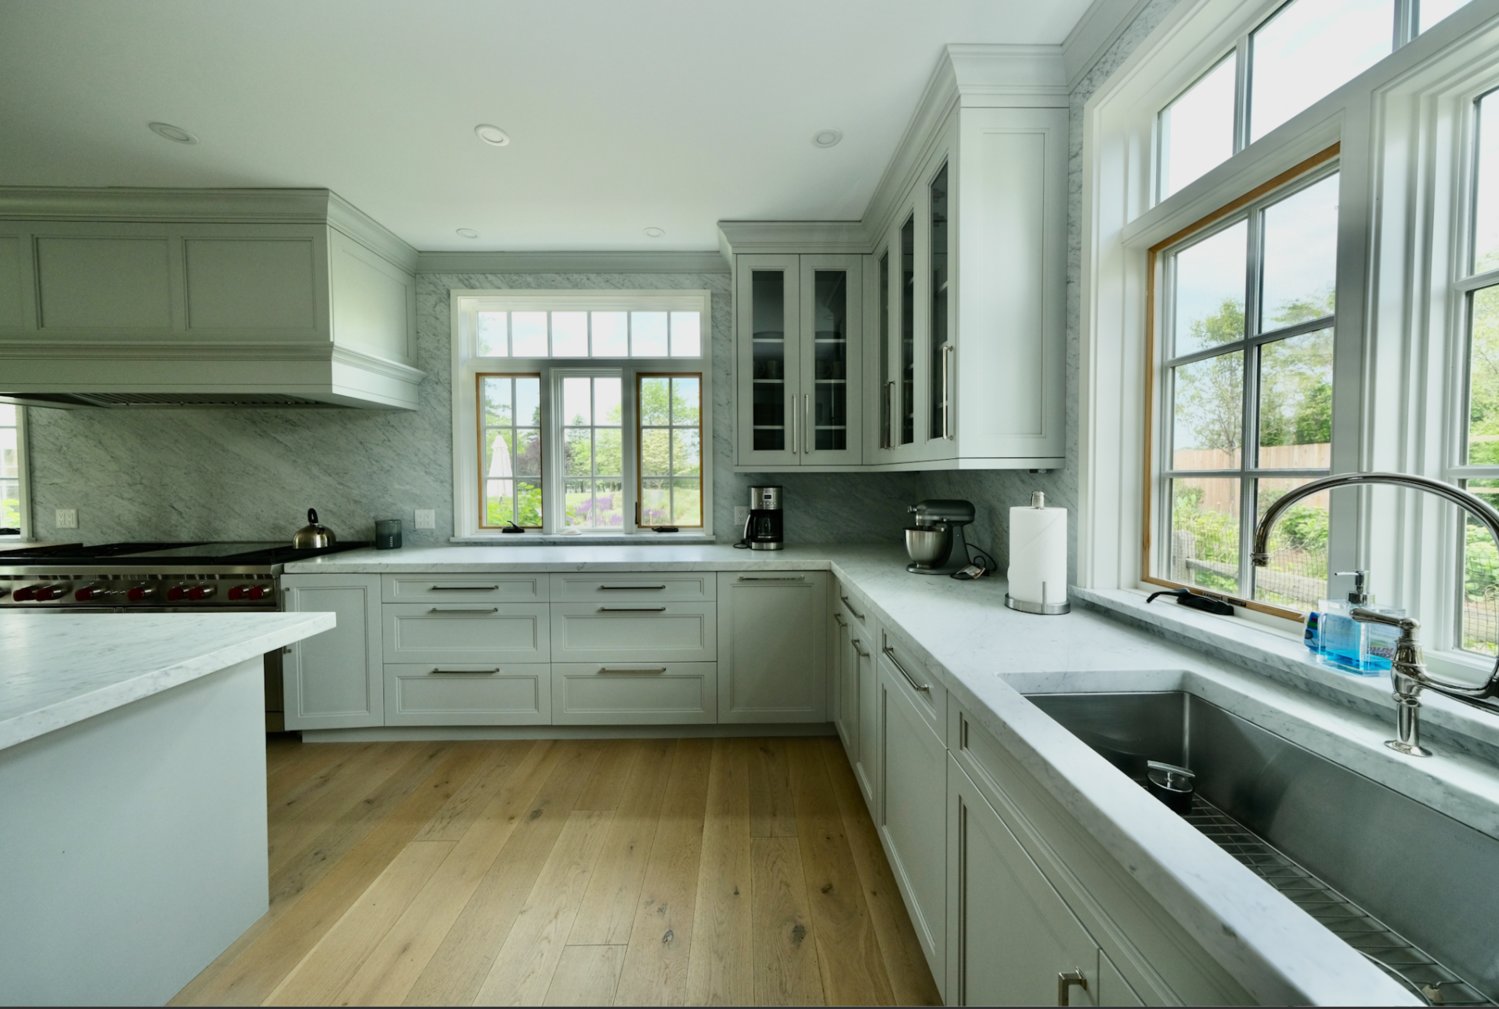 The gourmet kitchen has stone countertops, a spacious center island and high-end appliances by Wolf, Sub-Zero and Miele.